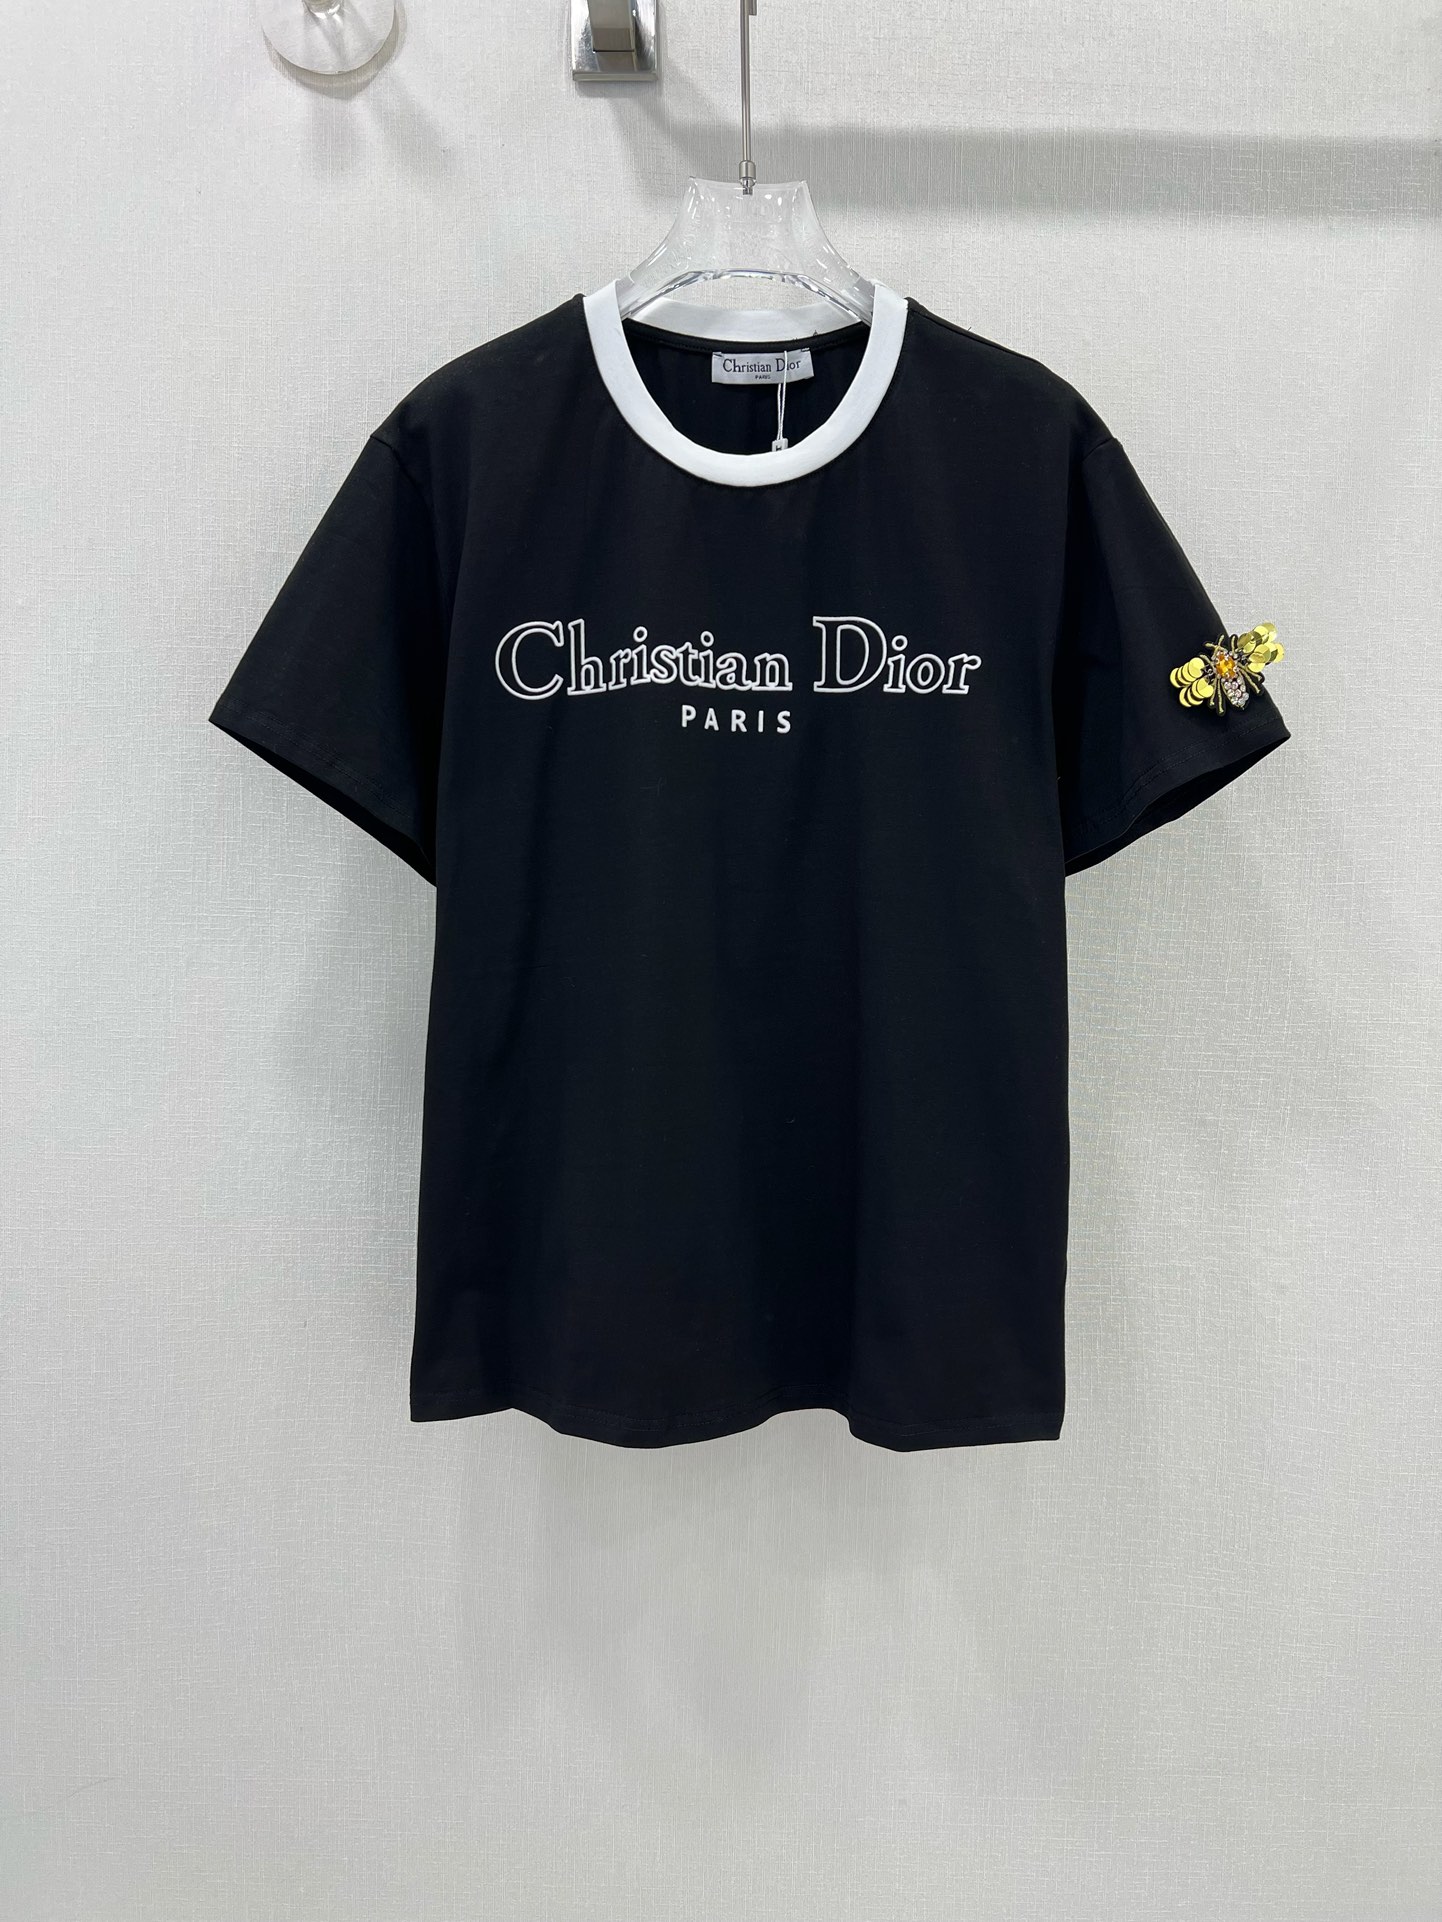 Dior Clothing T-Shirt Black White Embroidery Spring/Summer Collection Fashion Short Sleeve